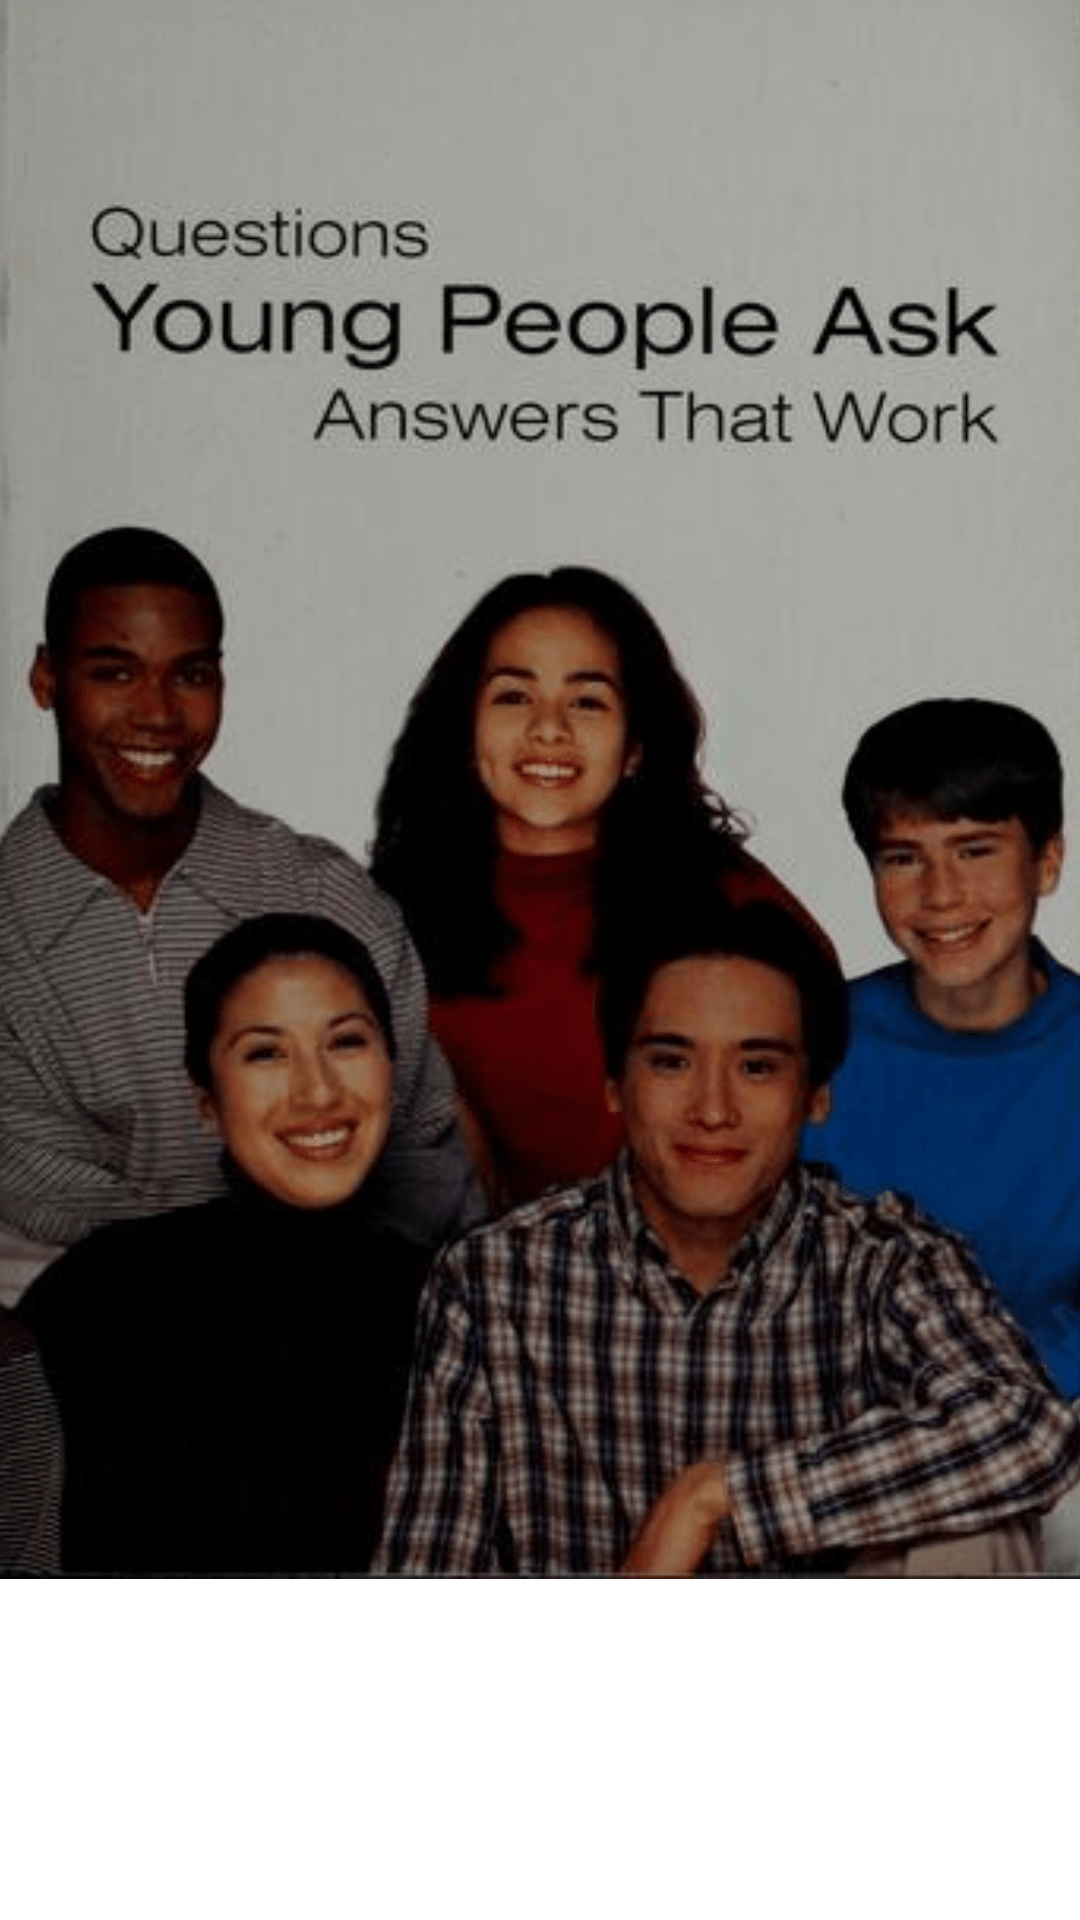 Questions That Young People Ask: Answers That Work